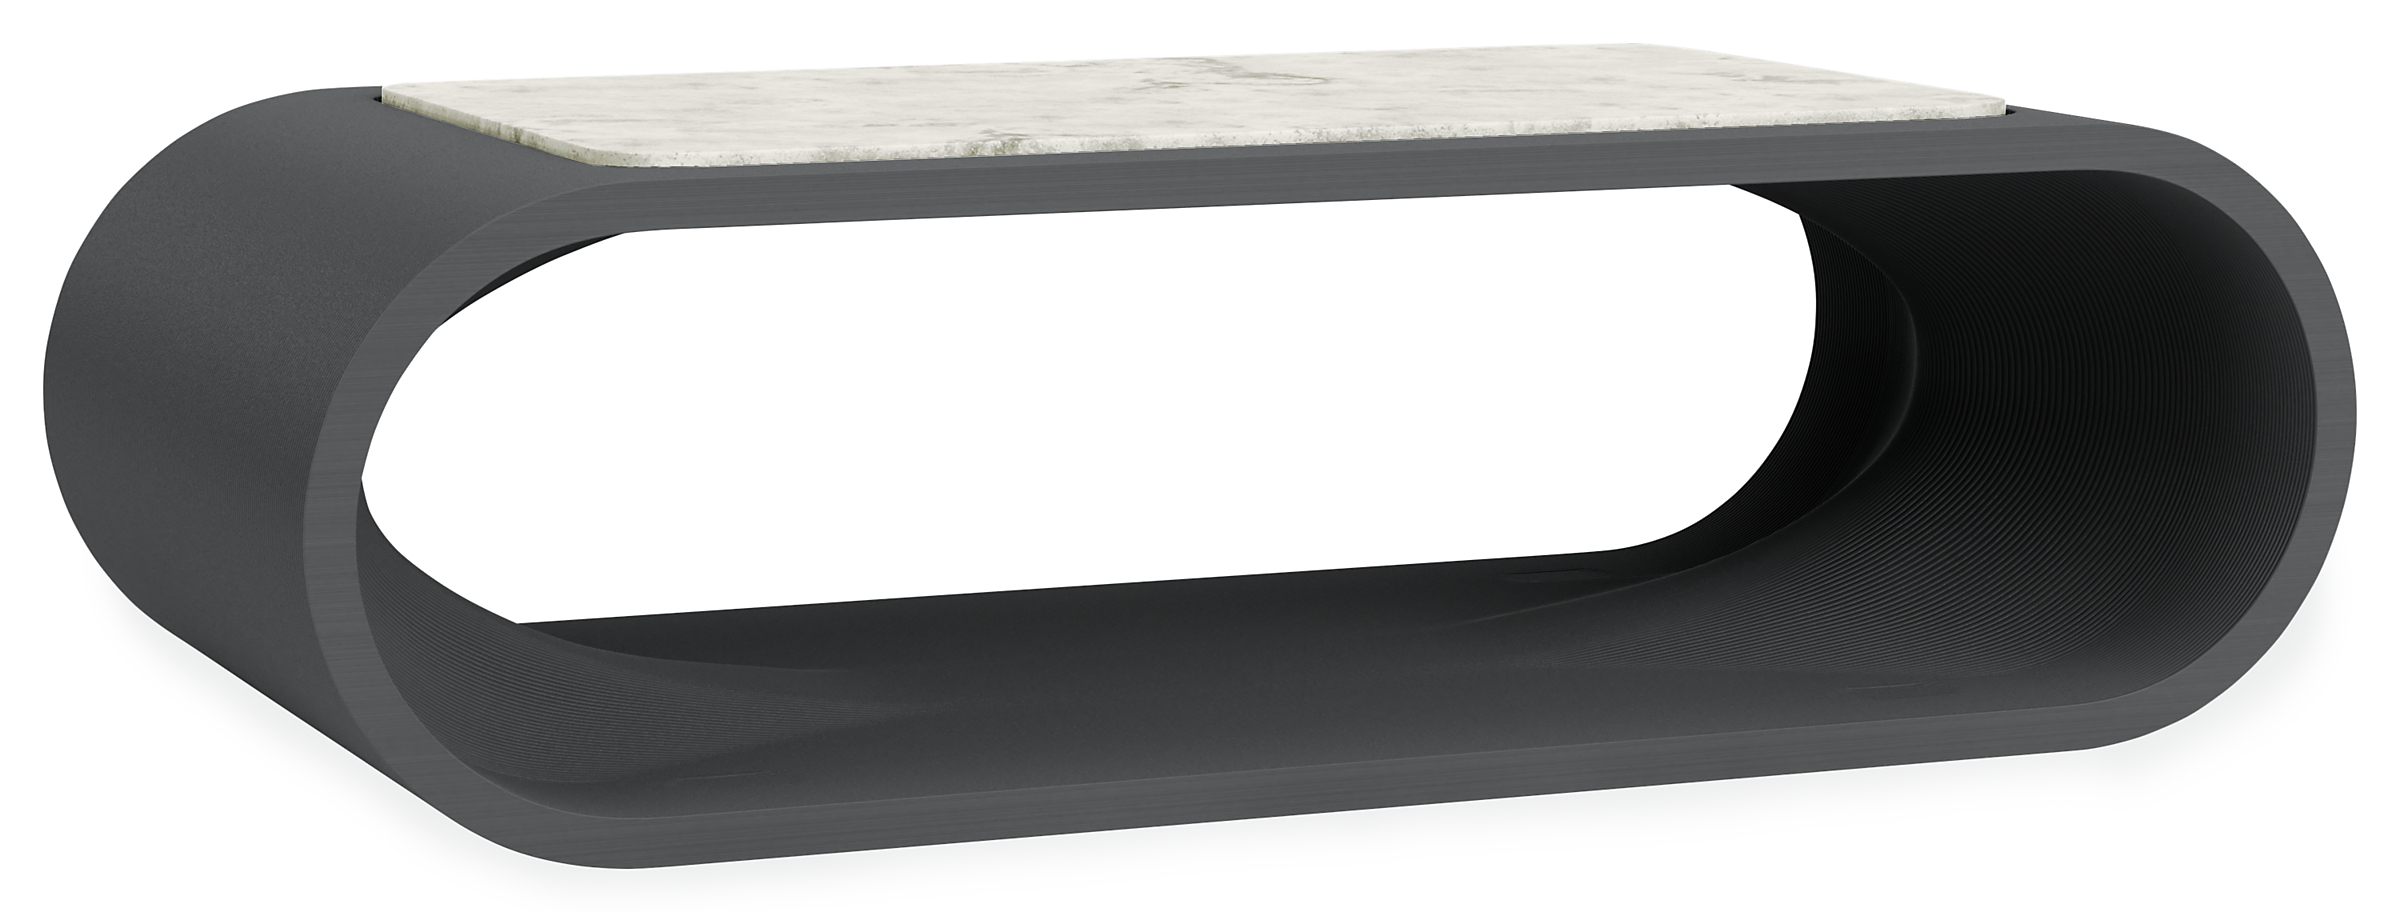 Tangent 48w 24d 15h Coffee Table